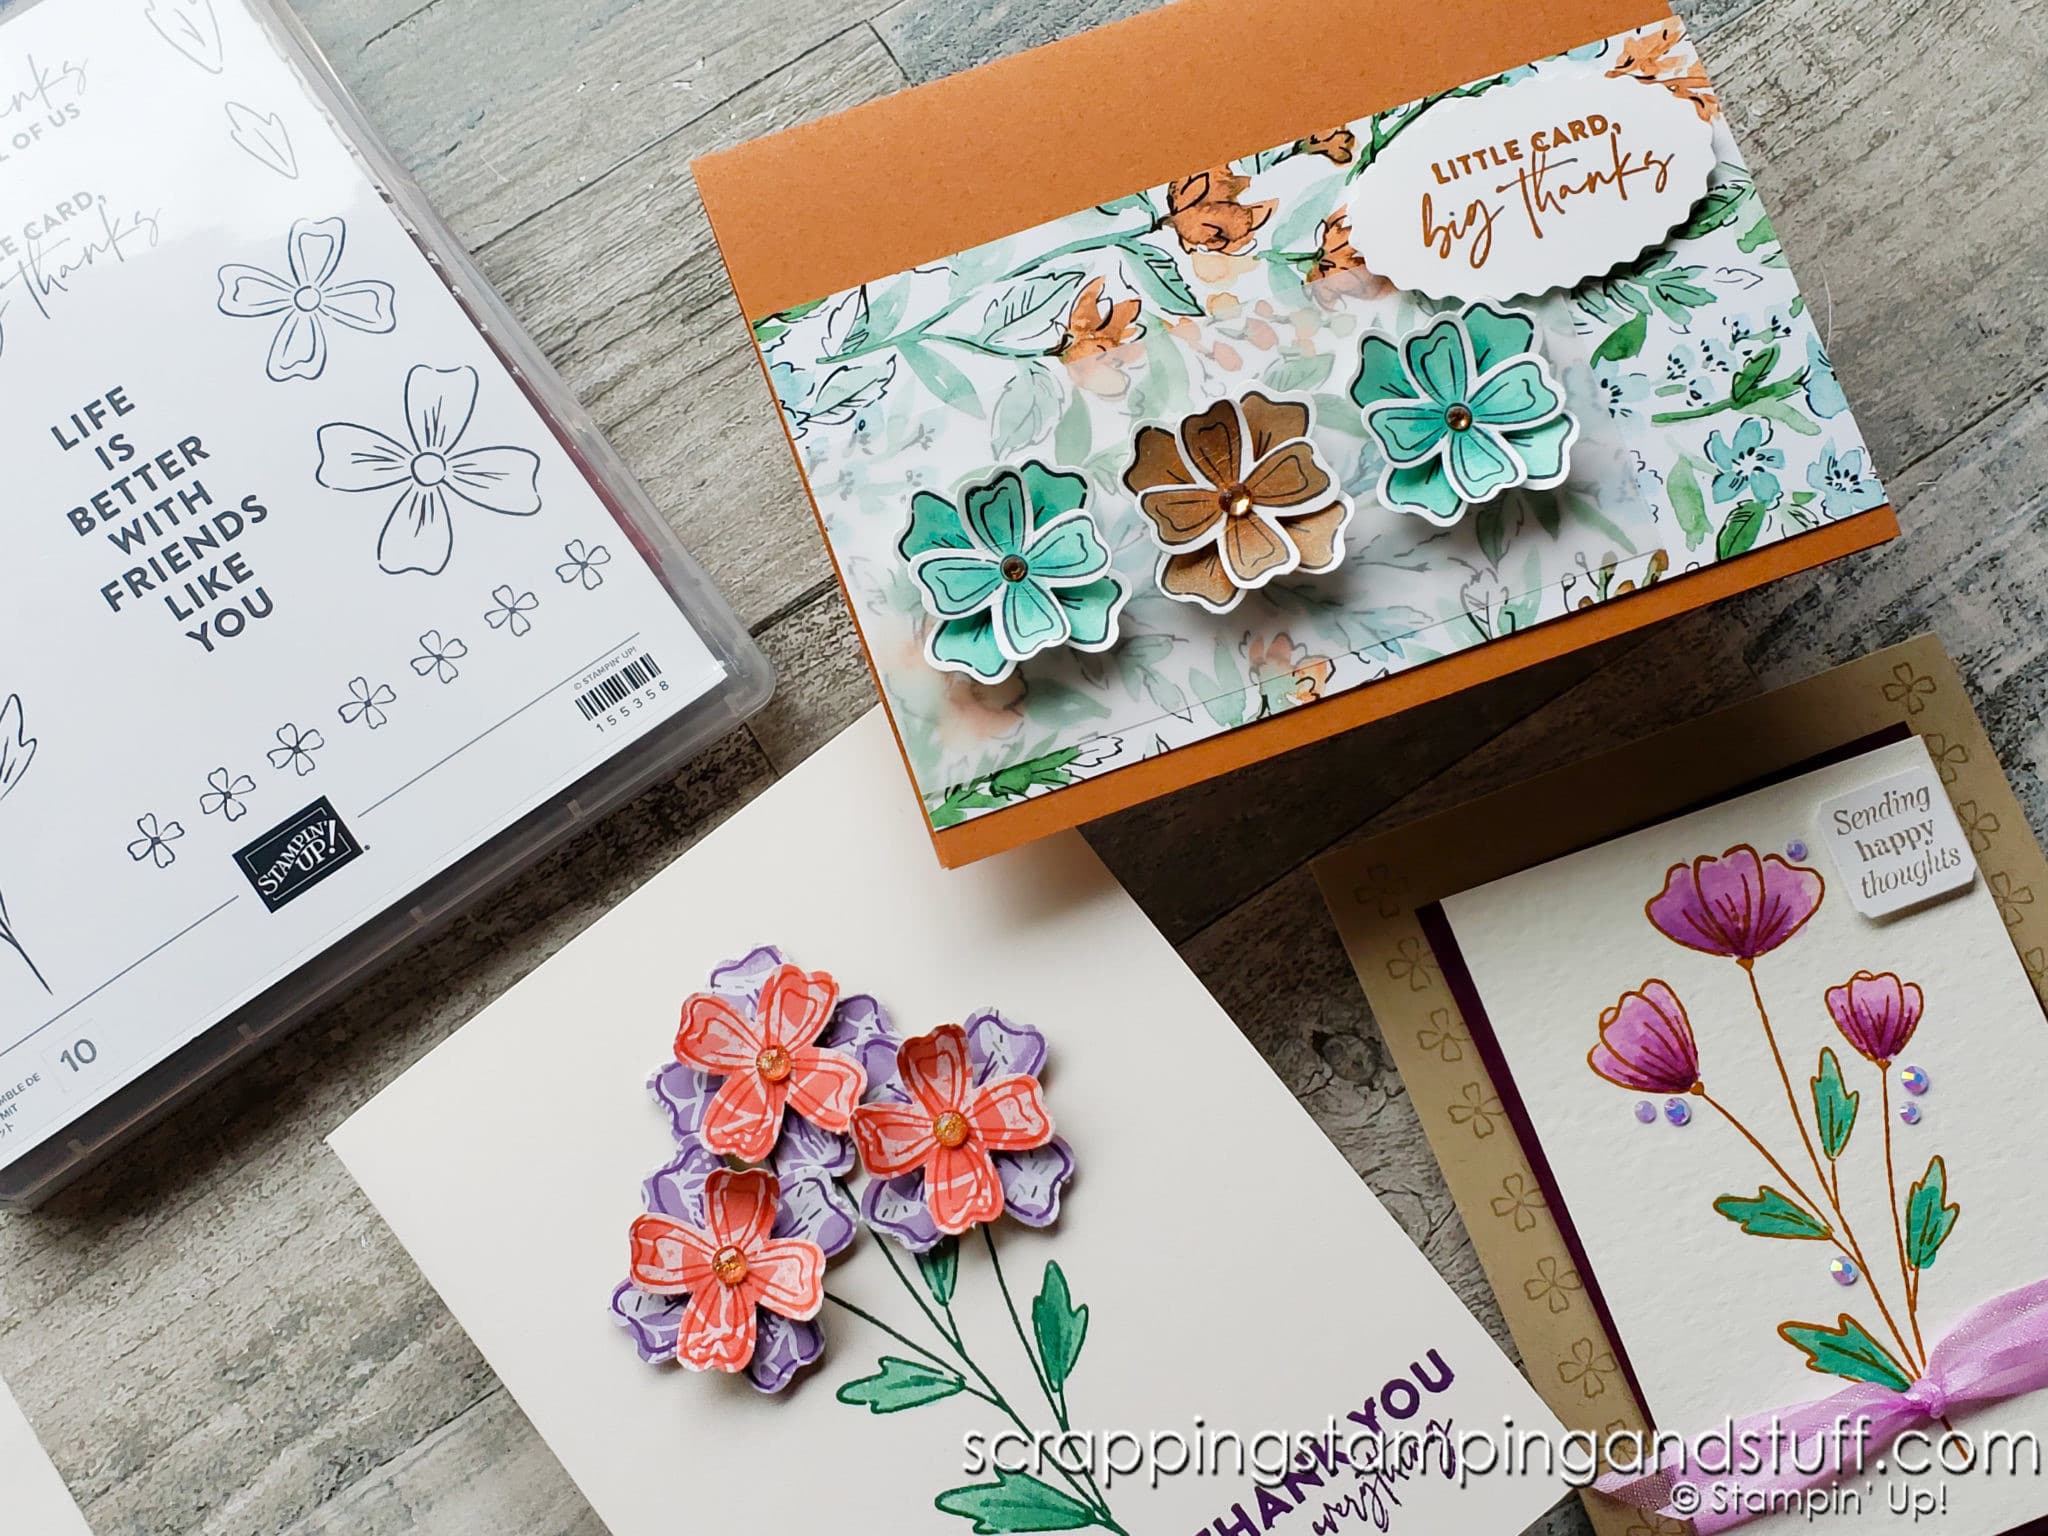 It’s Stampin Up Flowers of Friendship For Quick & Beautiful Floral Cards